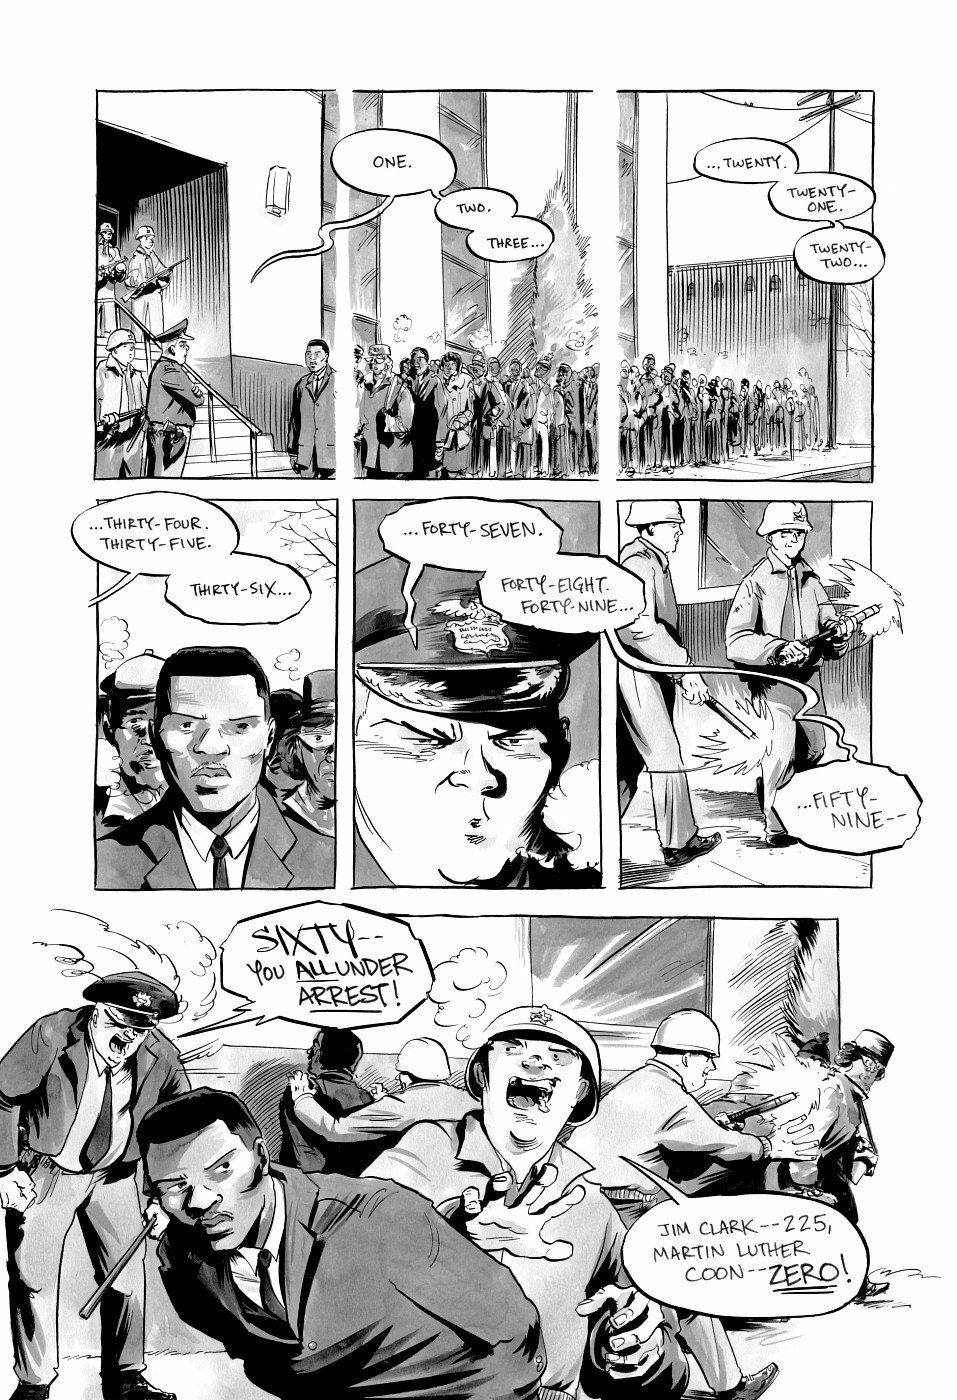 page 158 of march book three graphic novel